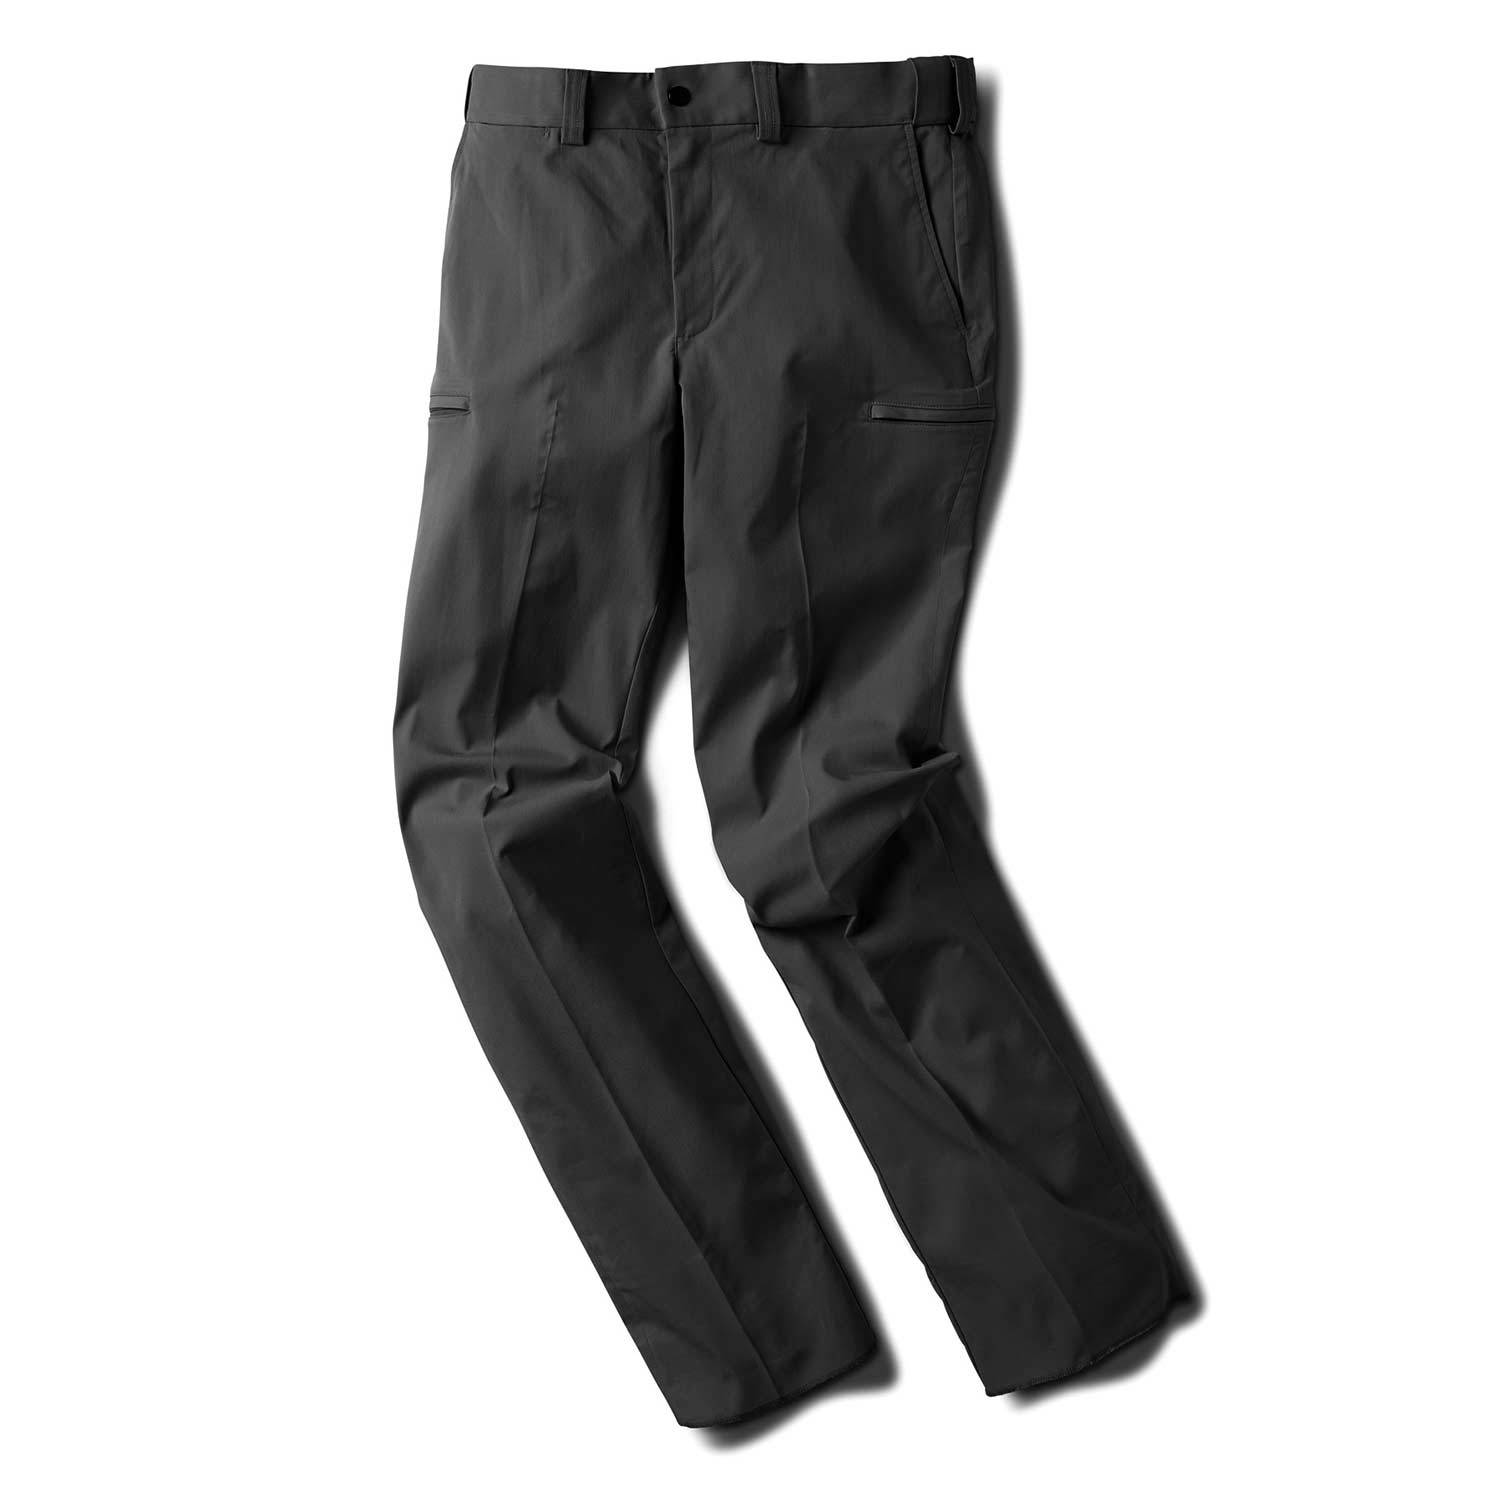 5.11 TACTICAL CLASS A FLEX-TAC POLY/WOOL TWILL CARGO PANT